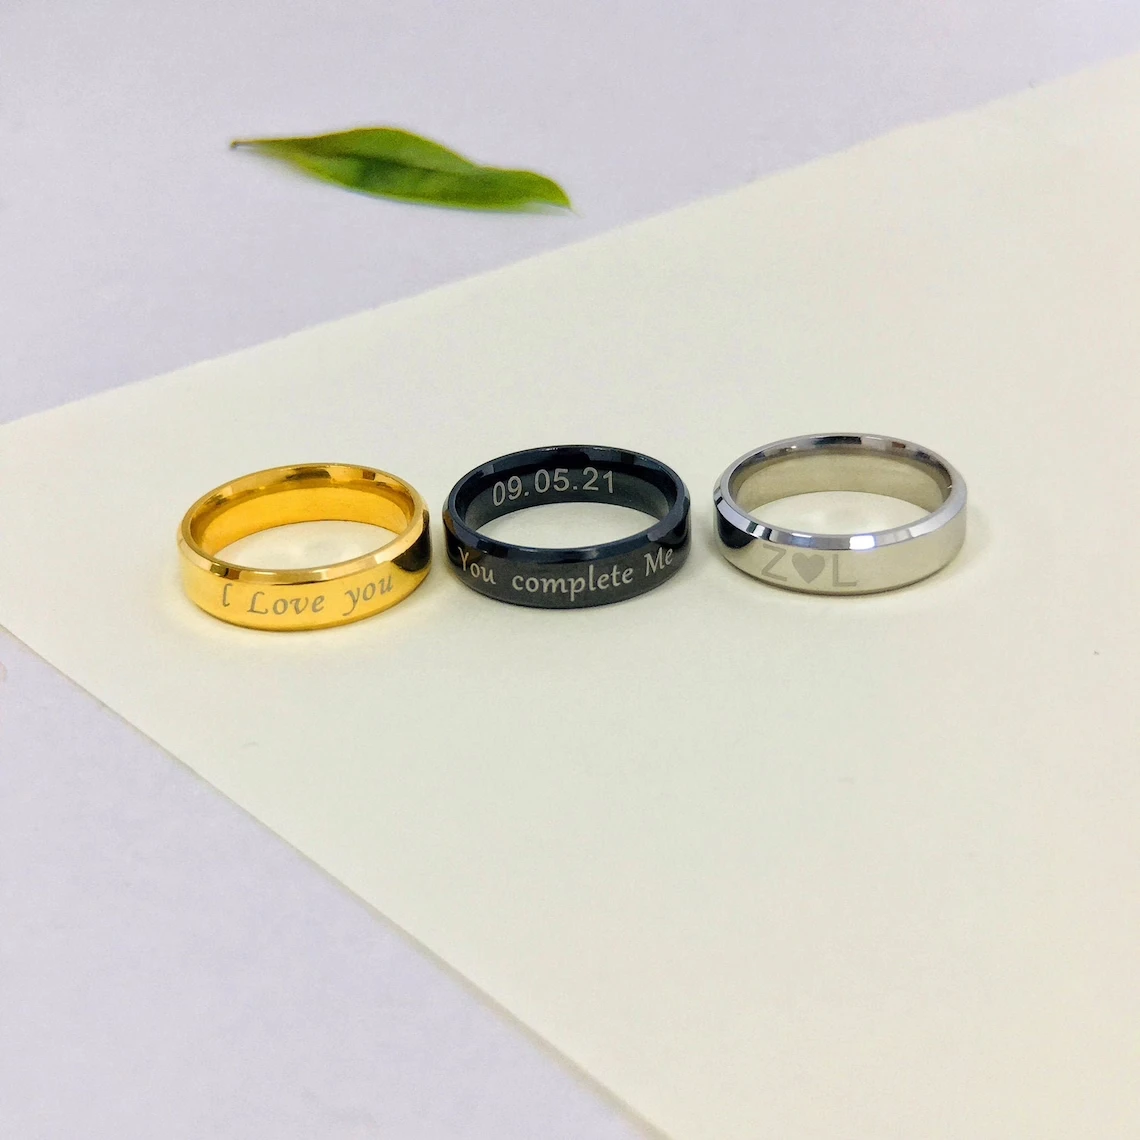 Customized Couples Rings, Sterling Silver Ring Set, His and Her Promise  Rings, Personalized Ring, Engraved Personalized Couples Ring - Etsy |  Sterlingsilber ringe, Paar ringe, Personalisierte ringe